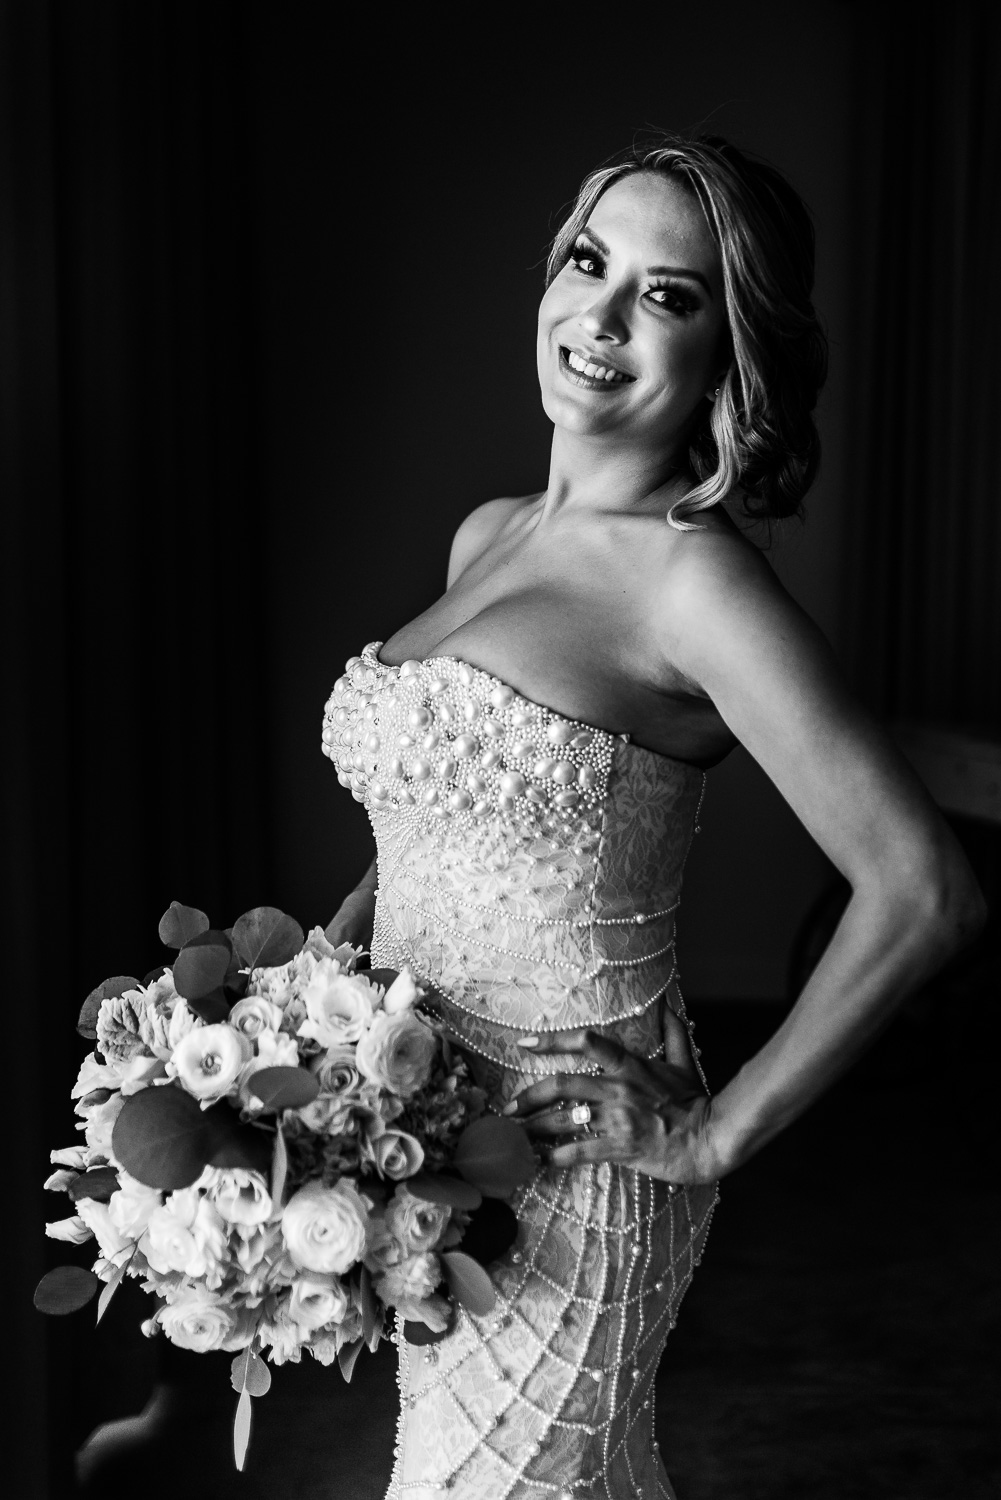  The bride is looking fabulous in her white gown and is smiling. She is holding her wedding bouquet  while  posing for the camera- destination wedding of the wonderful couple Cije and Jose at the beautiful El Ganzo Hotel, Mexico. GVphotographer is an